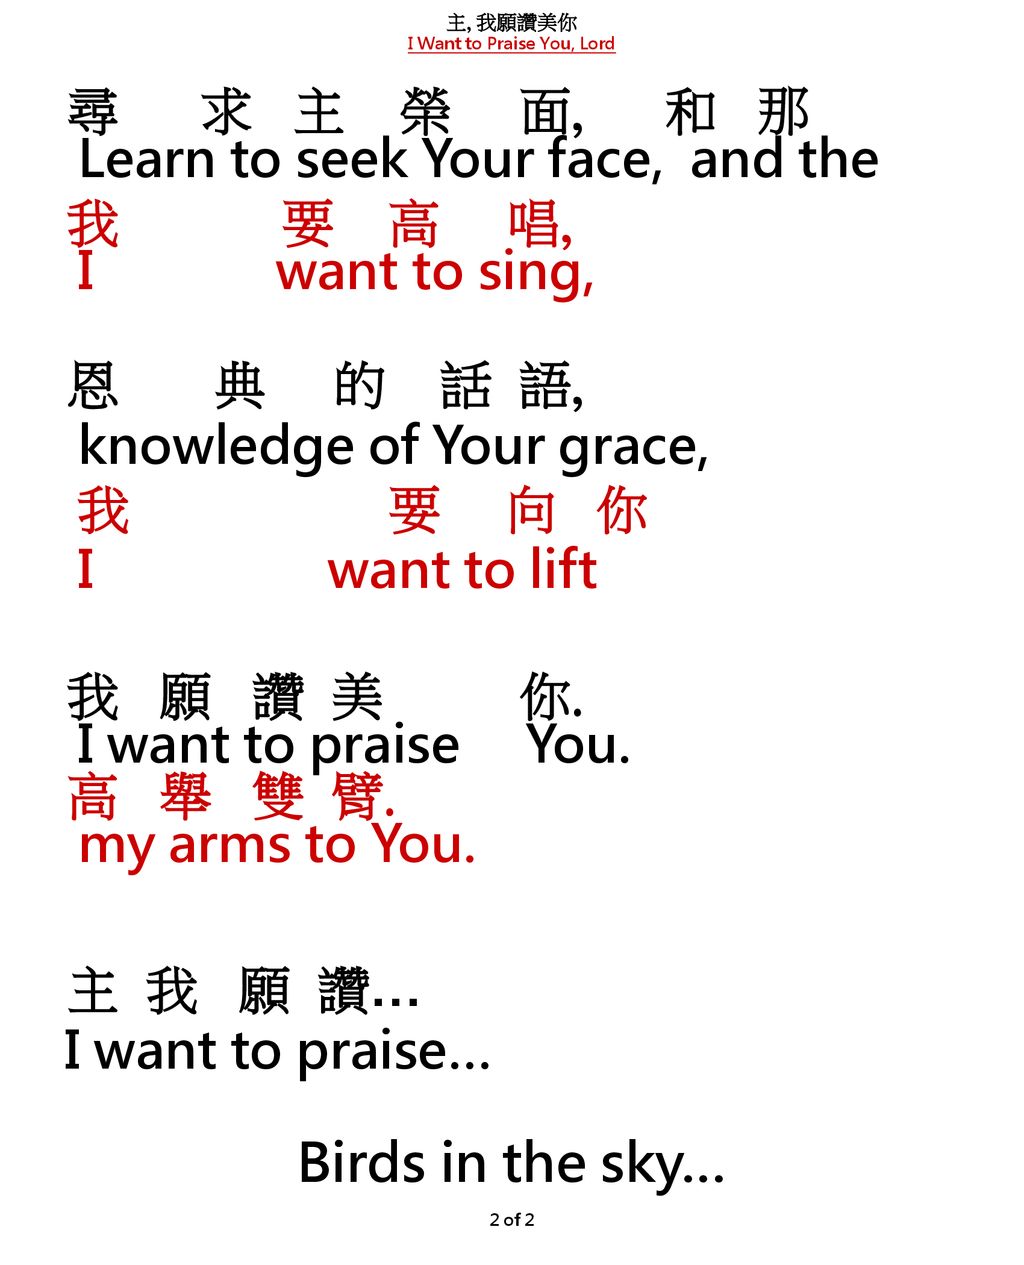 I Want to Praise You, Lord